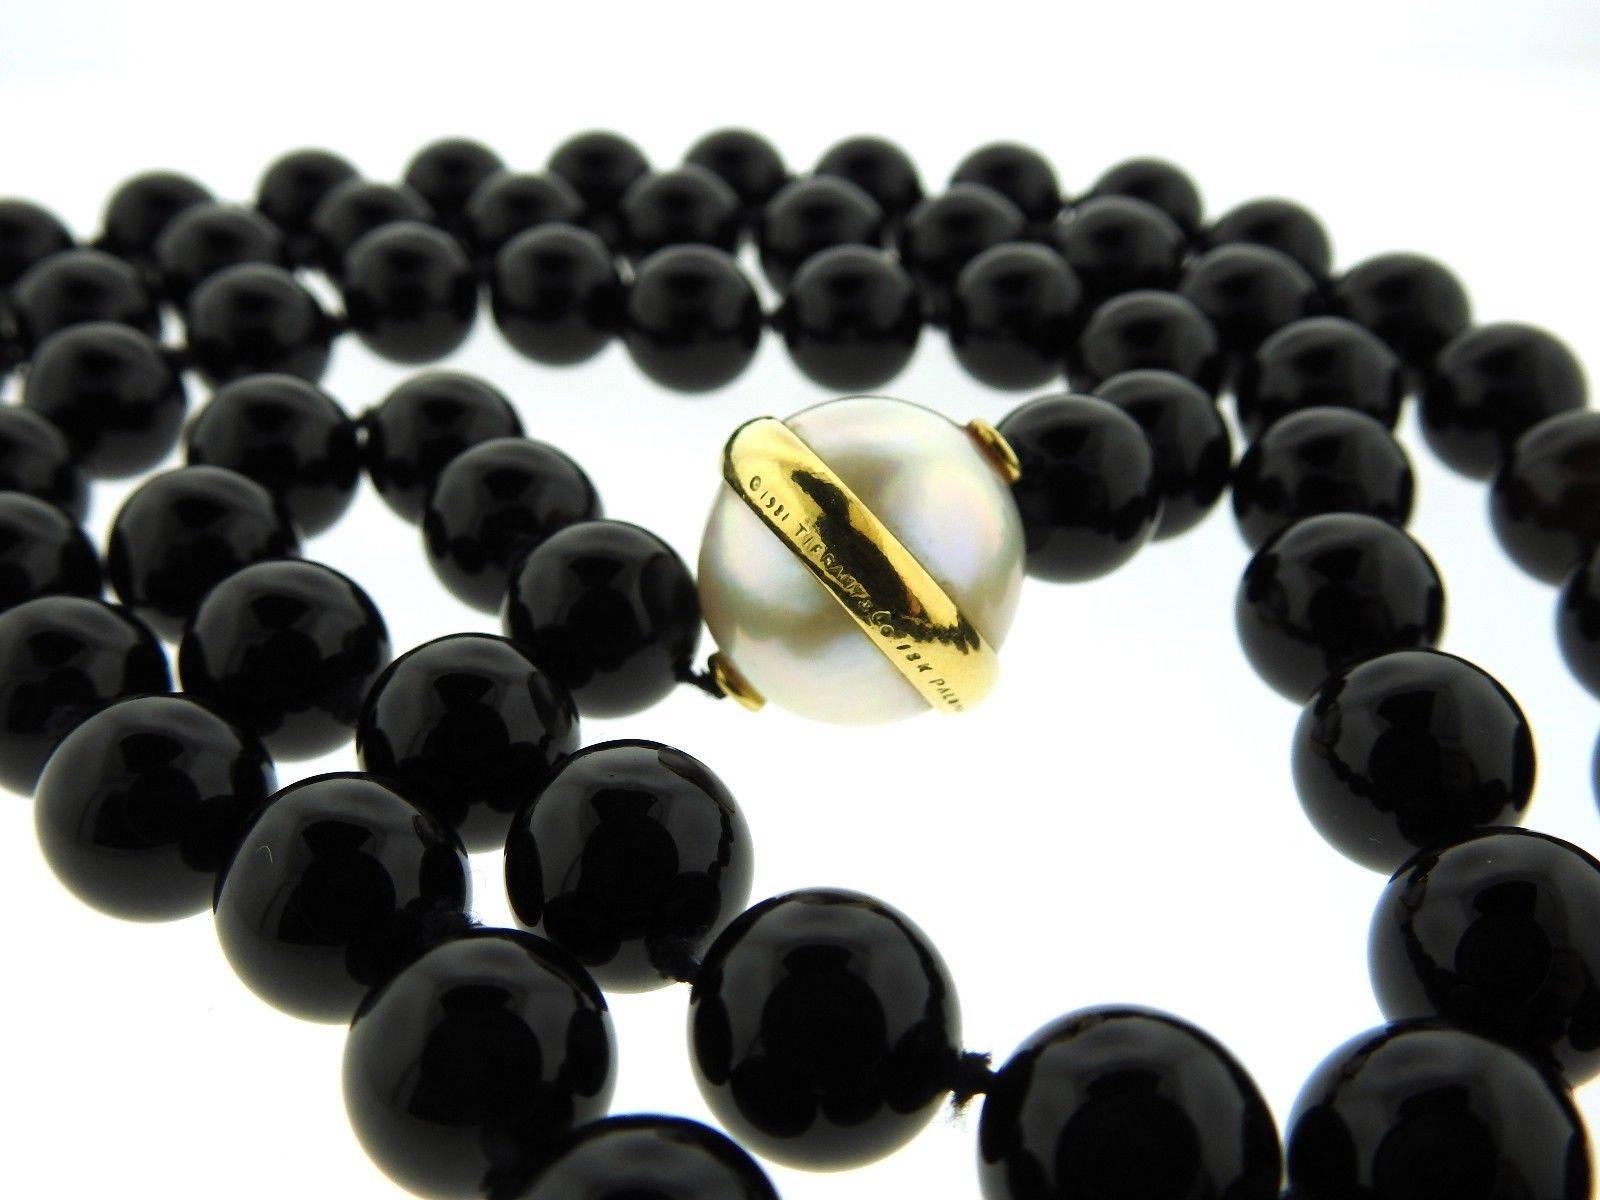 An 18k yellow gold necklace set with a 18.2mm pearl and 12mm onyx beads.  The necklace is 36